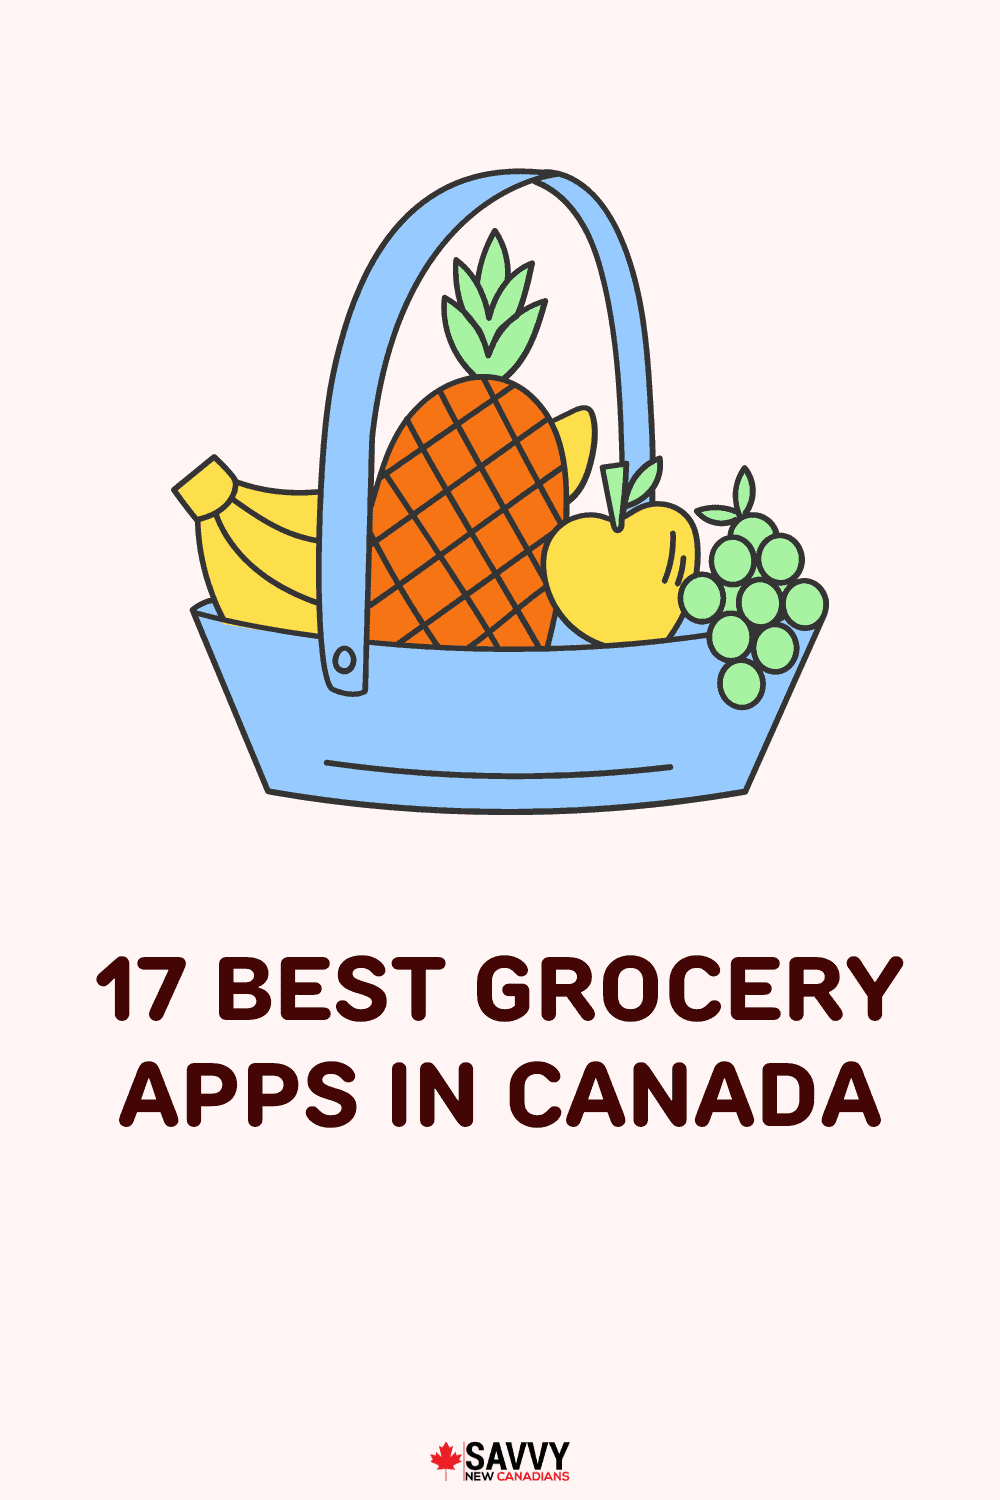 17 Best Grocery Apps in Canada 2022